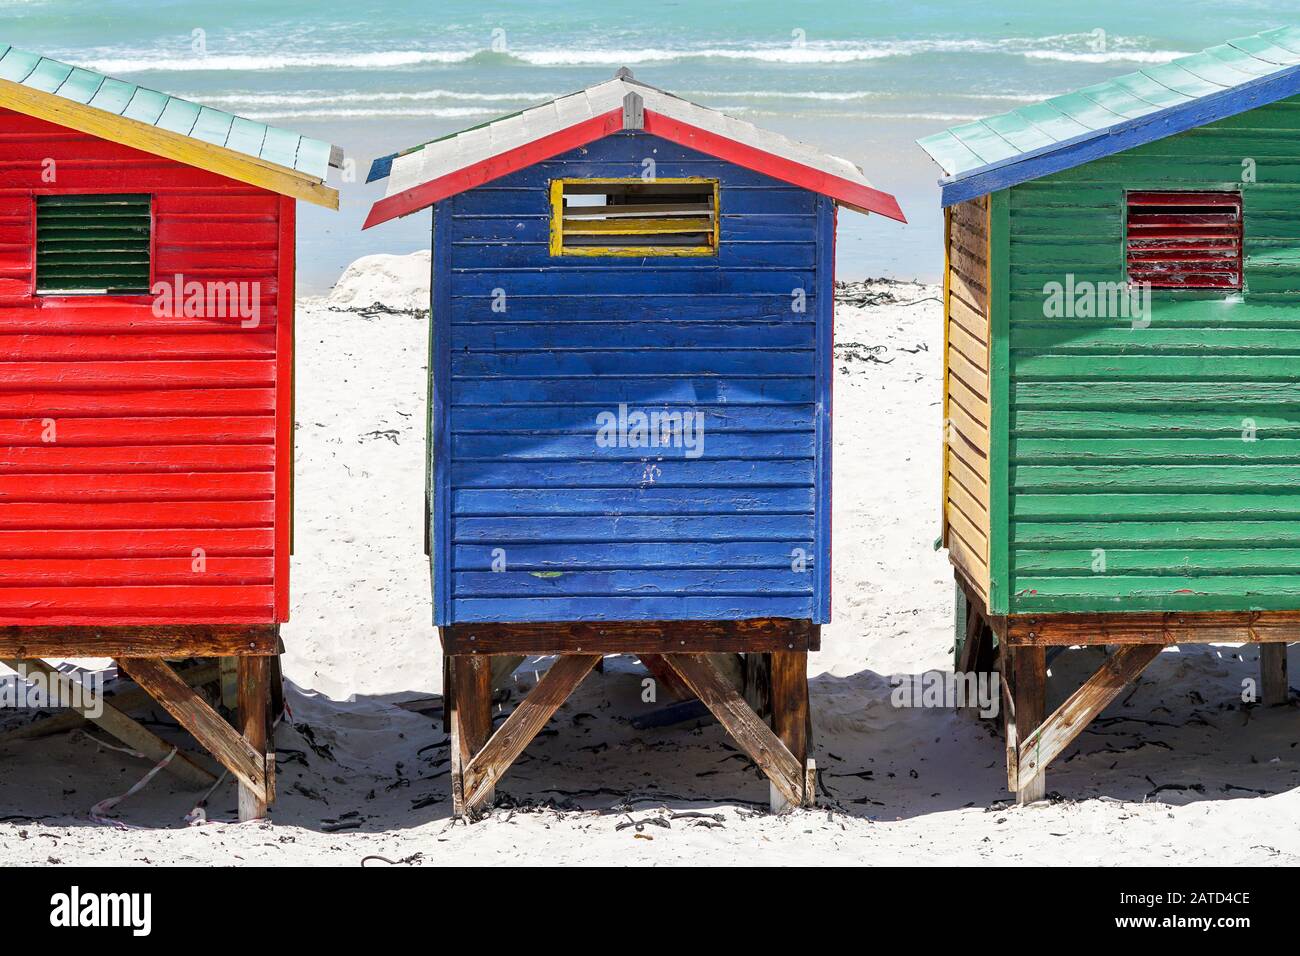 colourful, multicoloured beach huts, cabins old and wooden with peeling paint at Muizenberg beach, Cape Peninsula,South Africa concept abstract summer Stock Photo